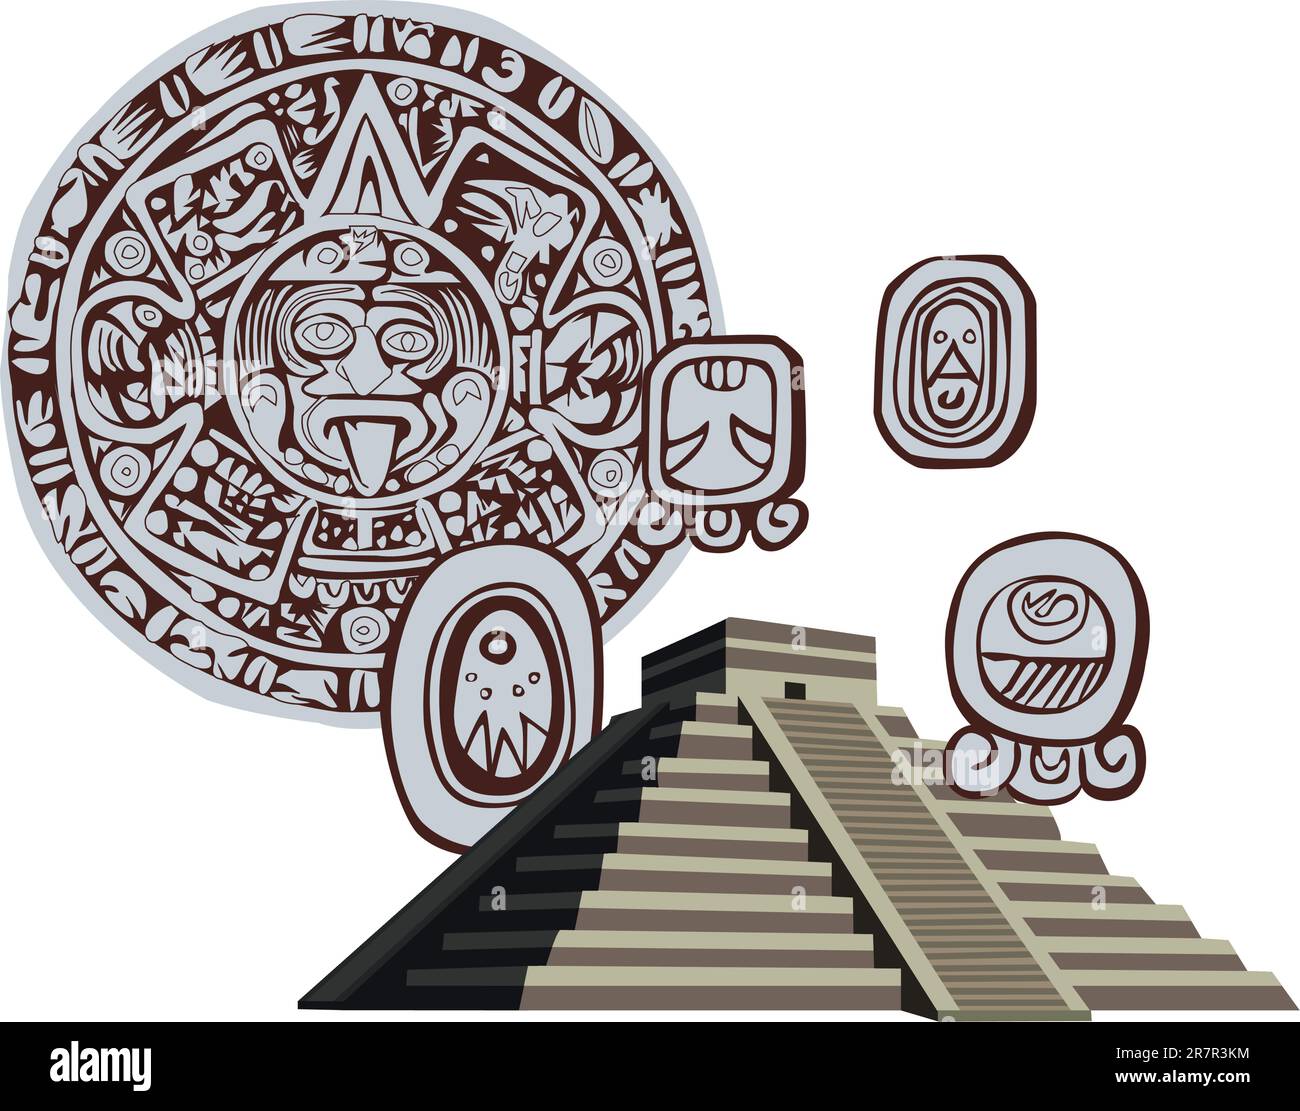 Illustration with Mayan Pyramid and ancient glyphs Stock Vector